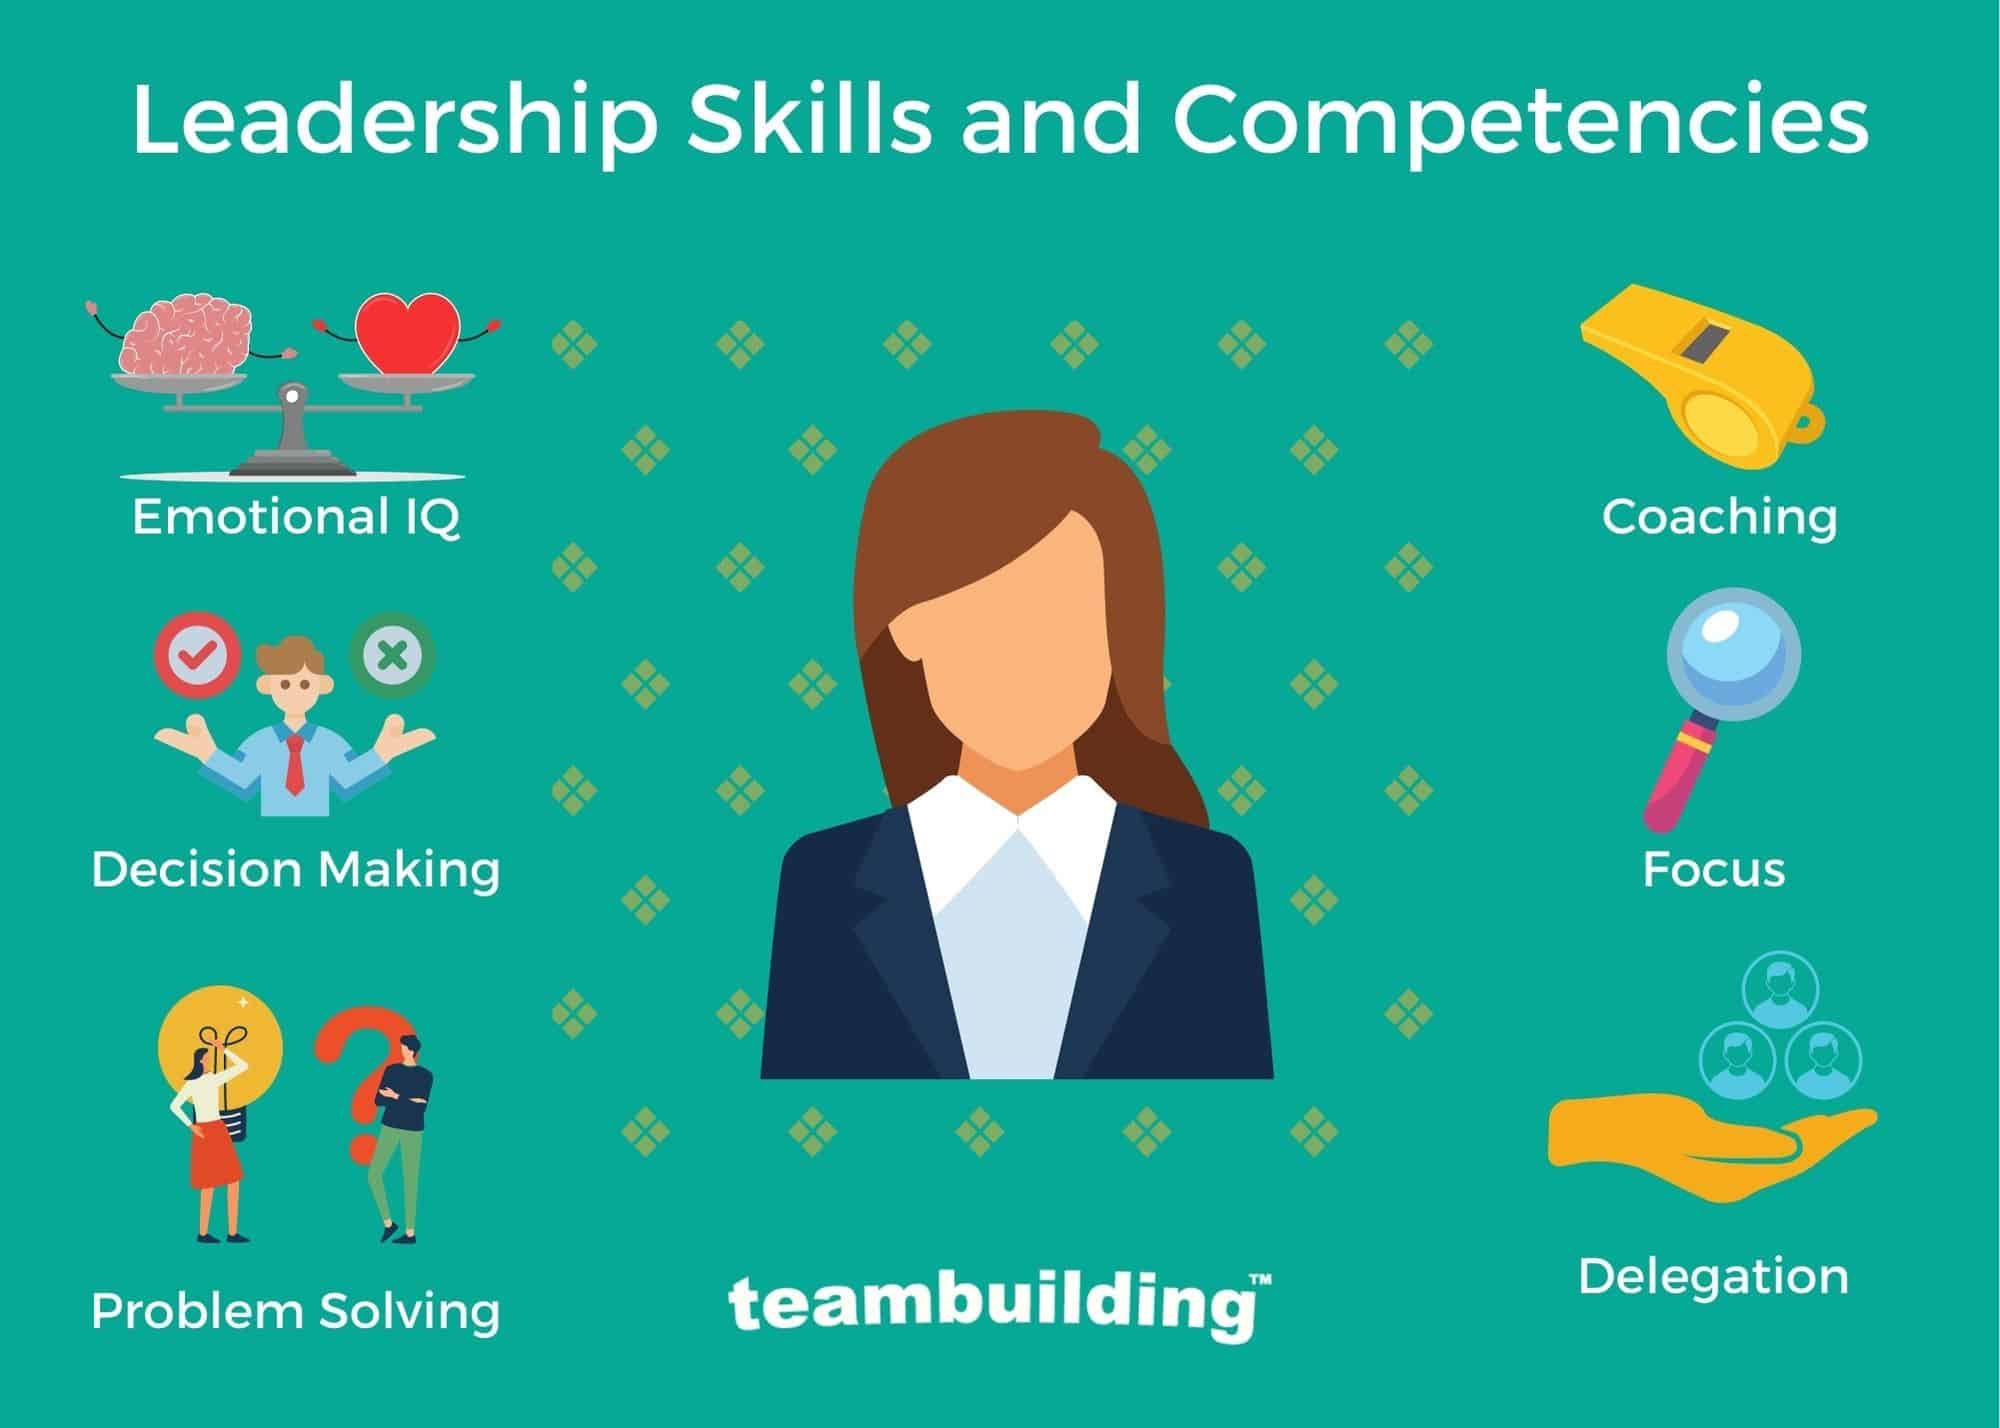 8 Leadership Skills You Need for a Successful HR Career